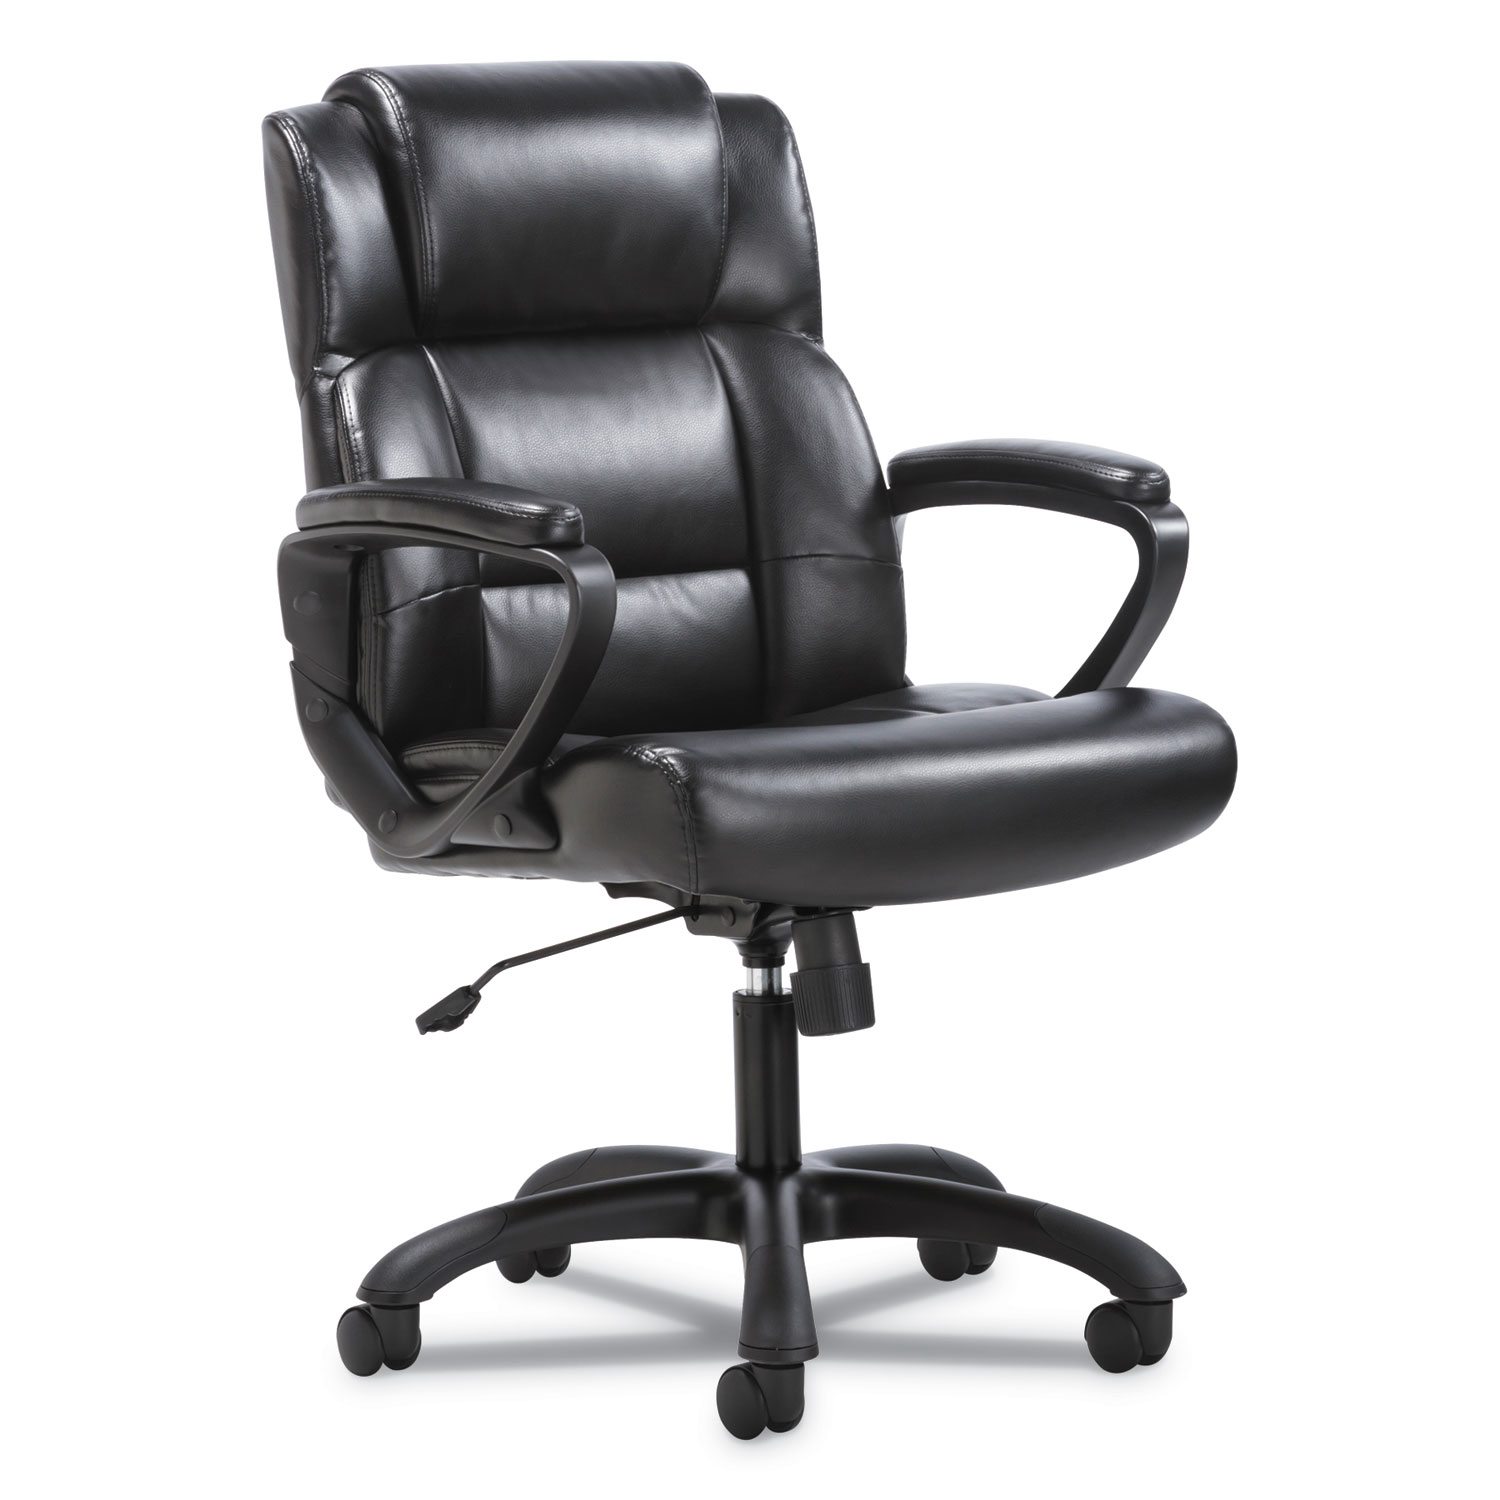 Mid-Back Executive Chair, Supports up to 250 lbs., Black Seat/Black Back, Black Base